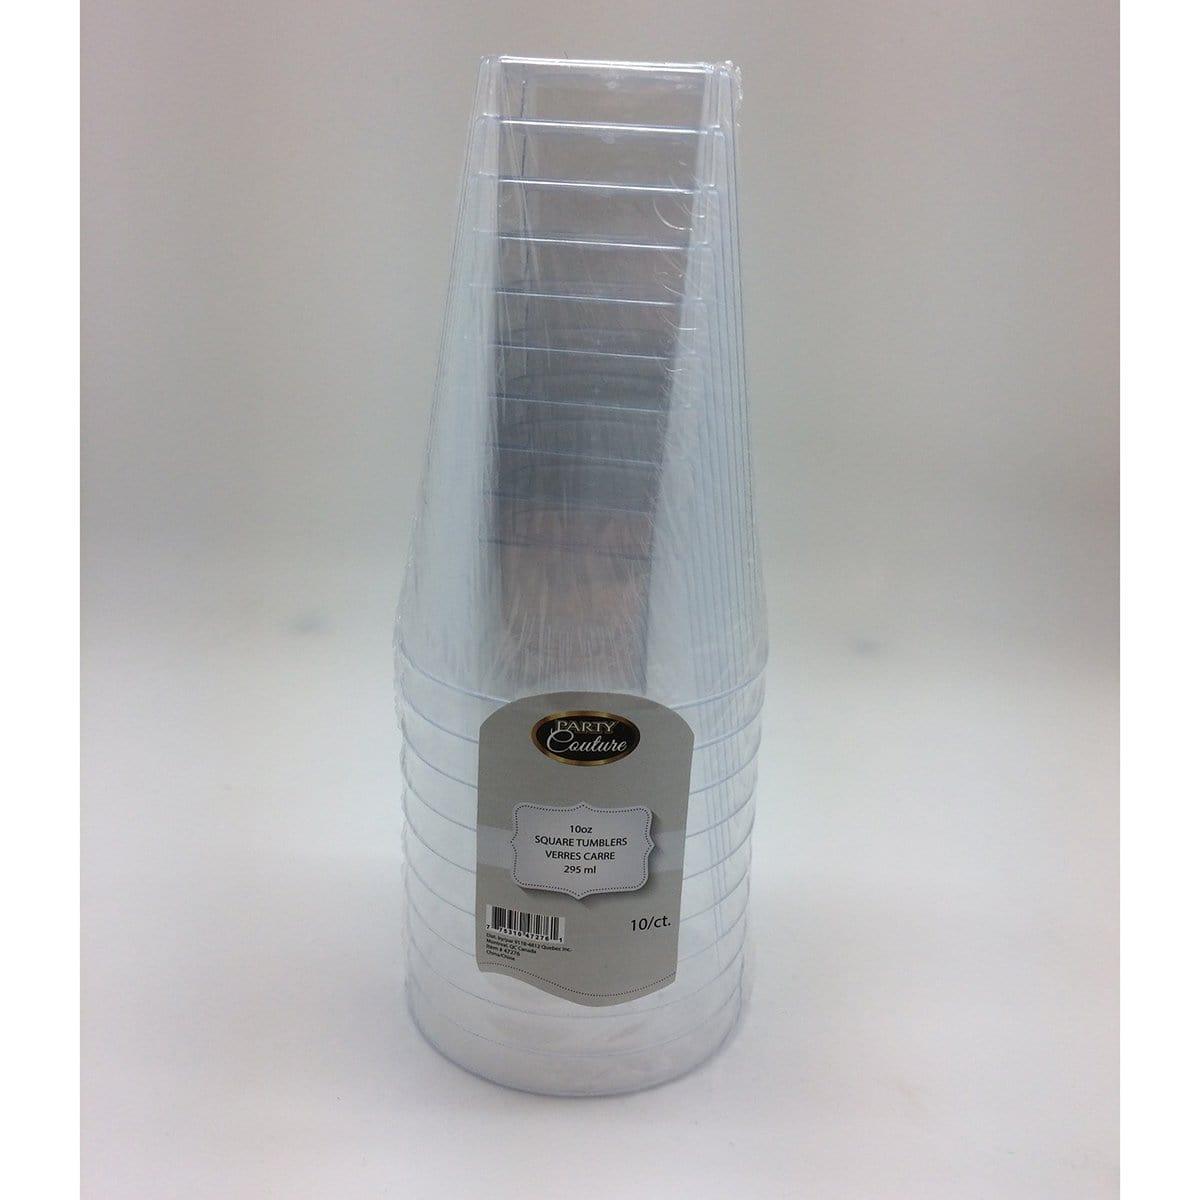 Buy Plasticware Clear 10 Oz Glasses 10/pkg. sold at Party Expert